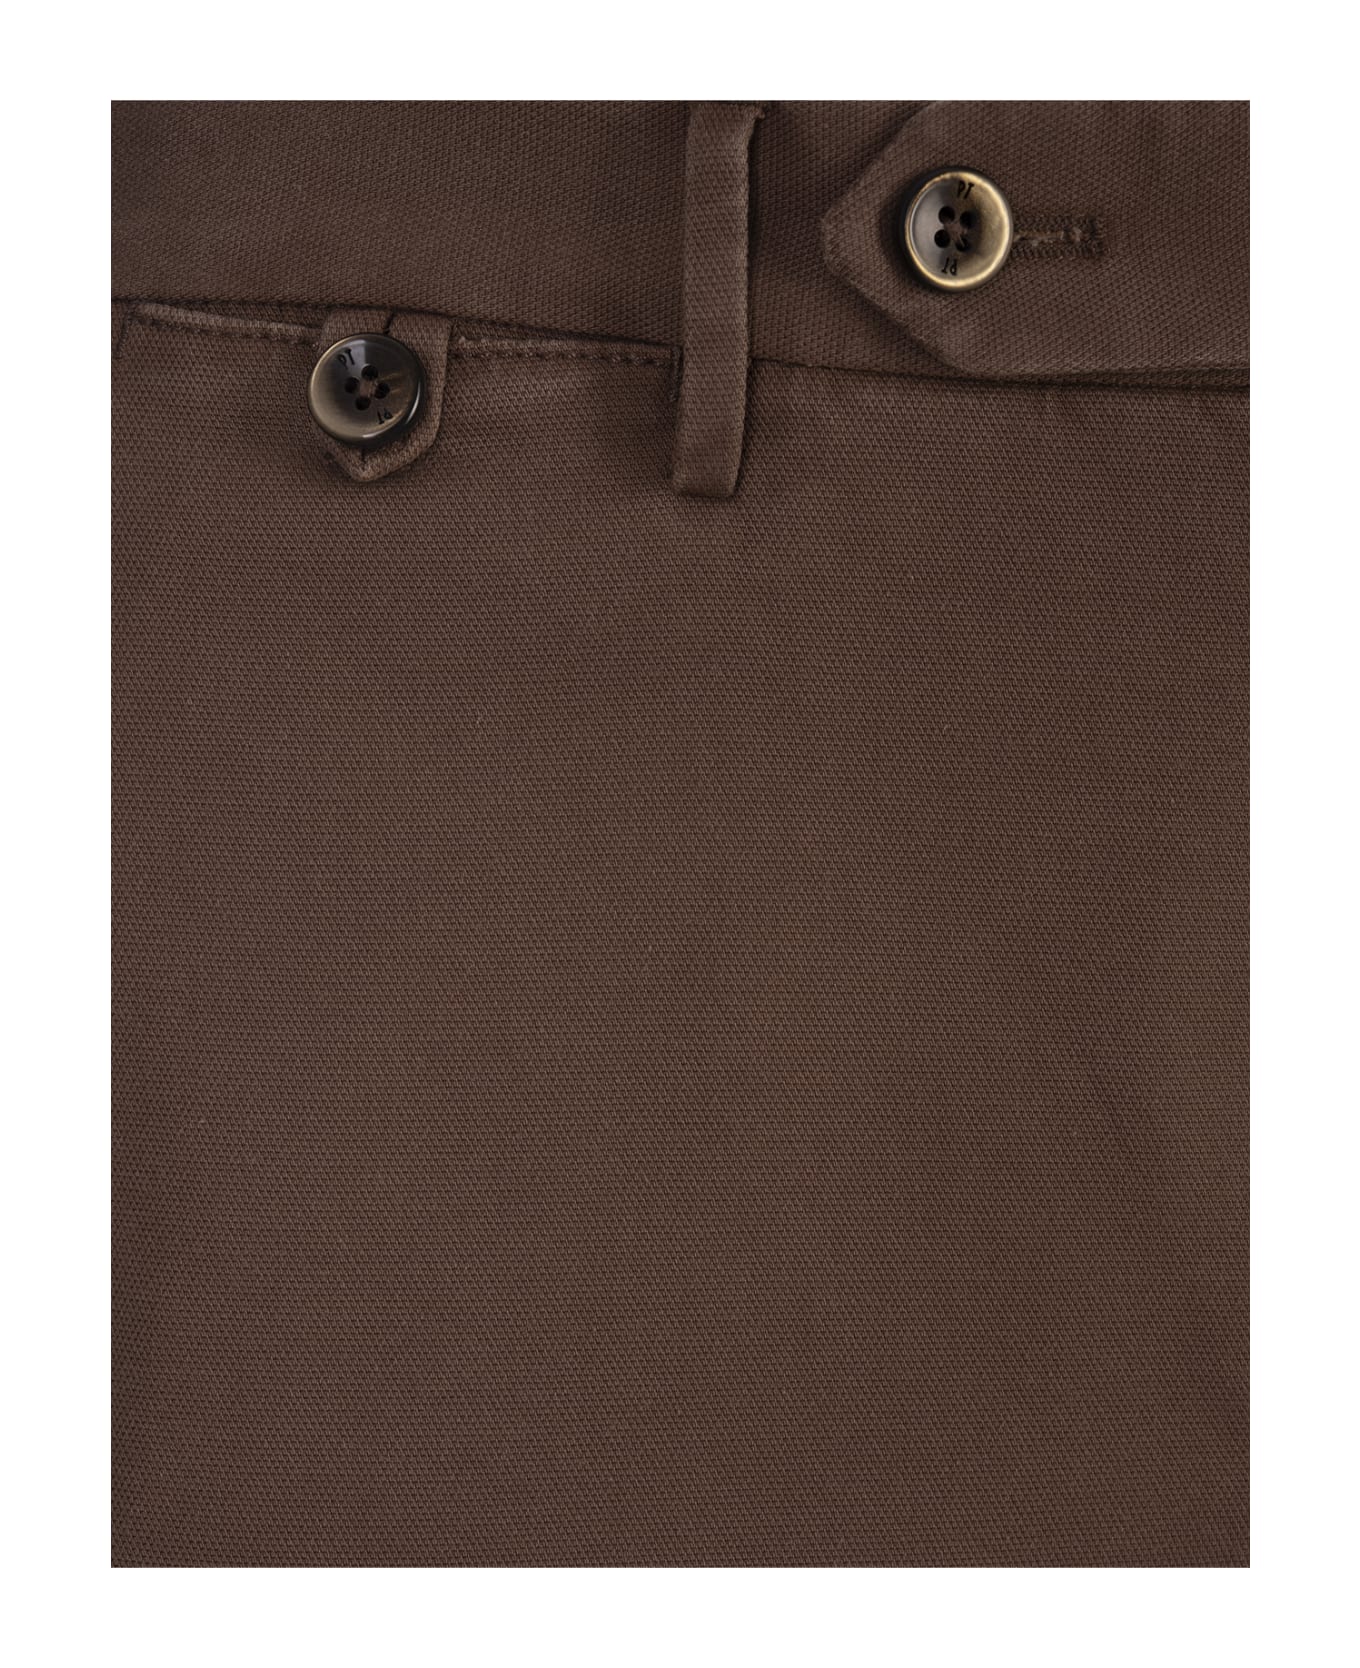 PT Torino Brown Stretch Fabric Master Fit Trousers - Brown